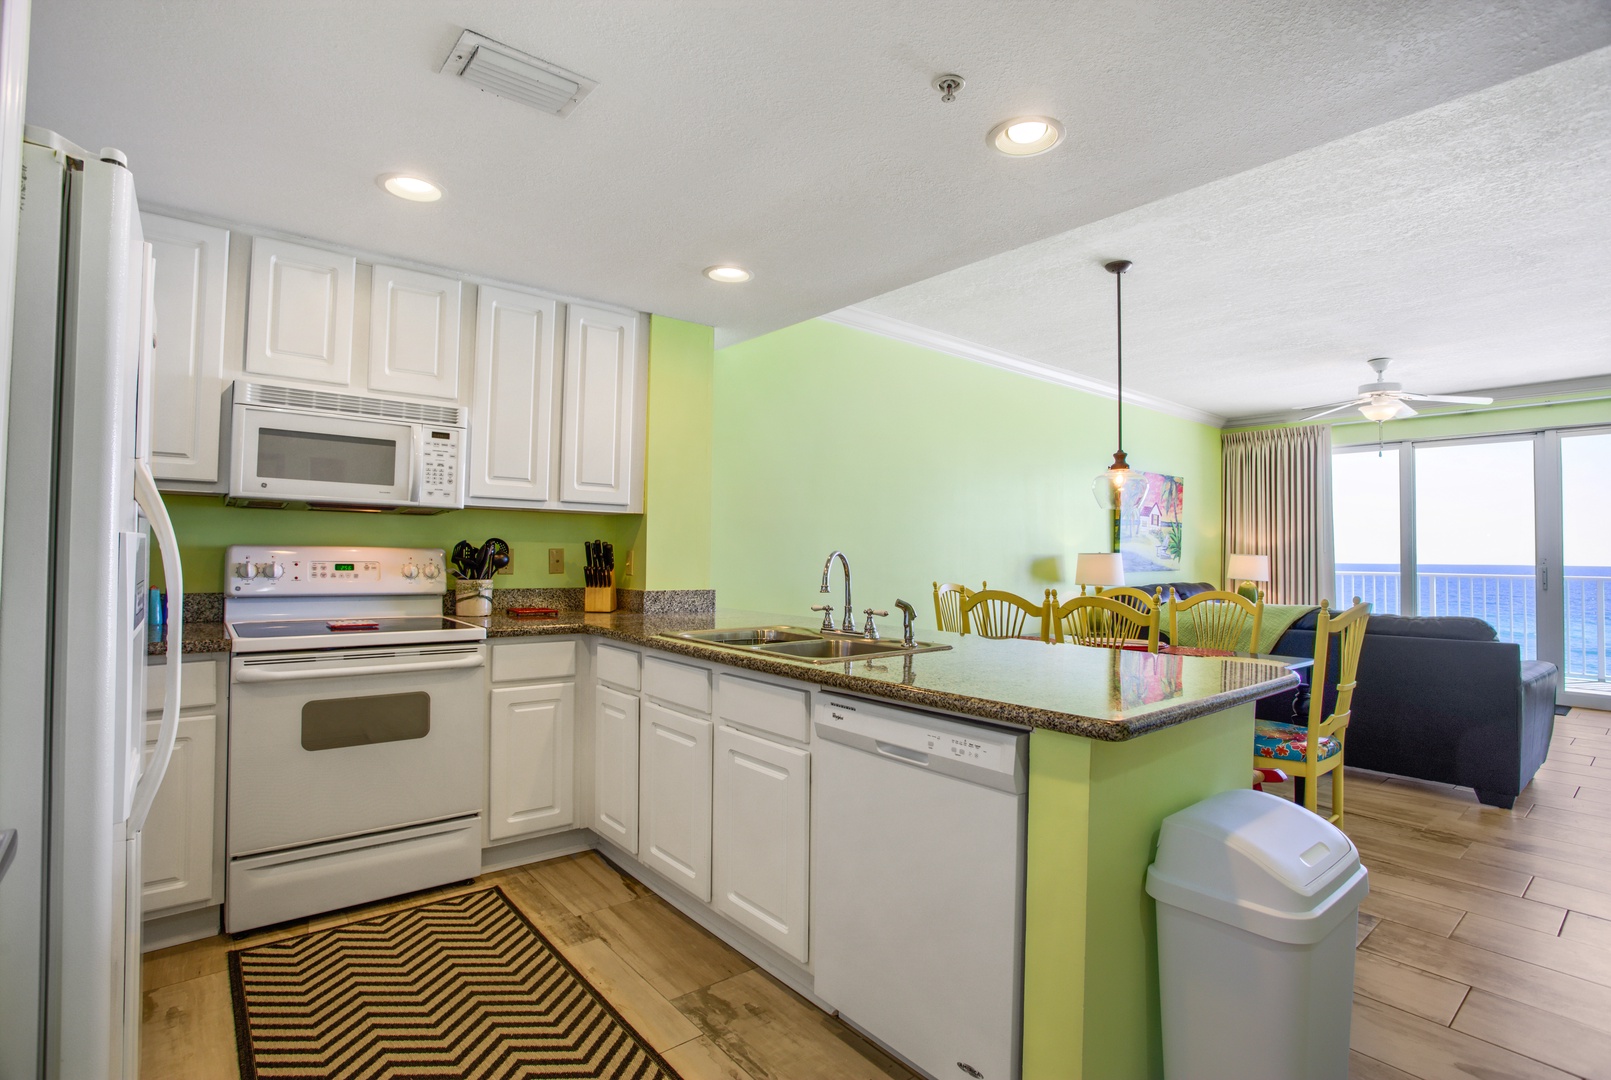 An open, airy kitchen equipped with all the comforts of home